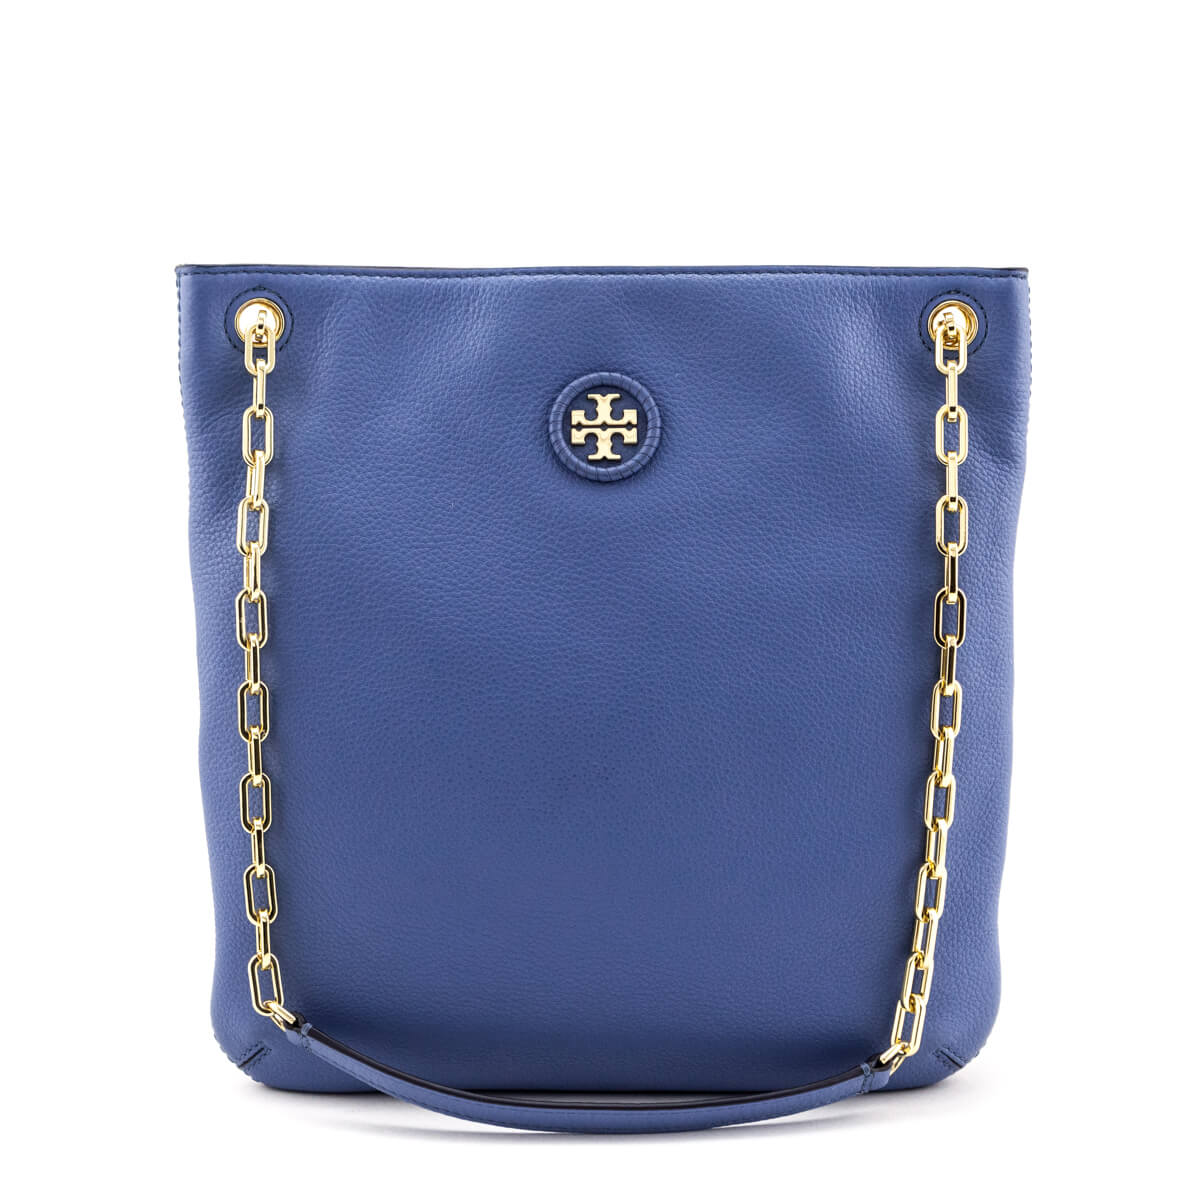 Top 85+ imagen how to authenticate tory burch bag - Thptnganamst.edu.vn